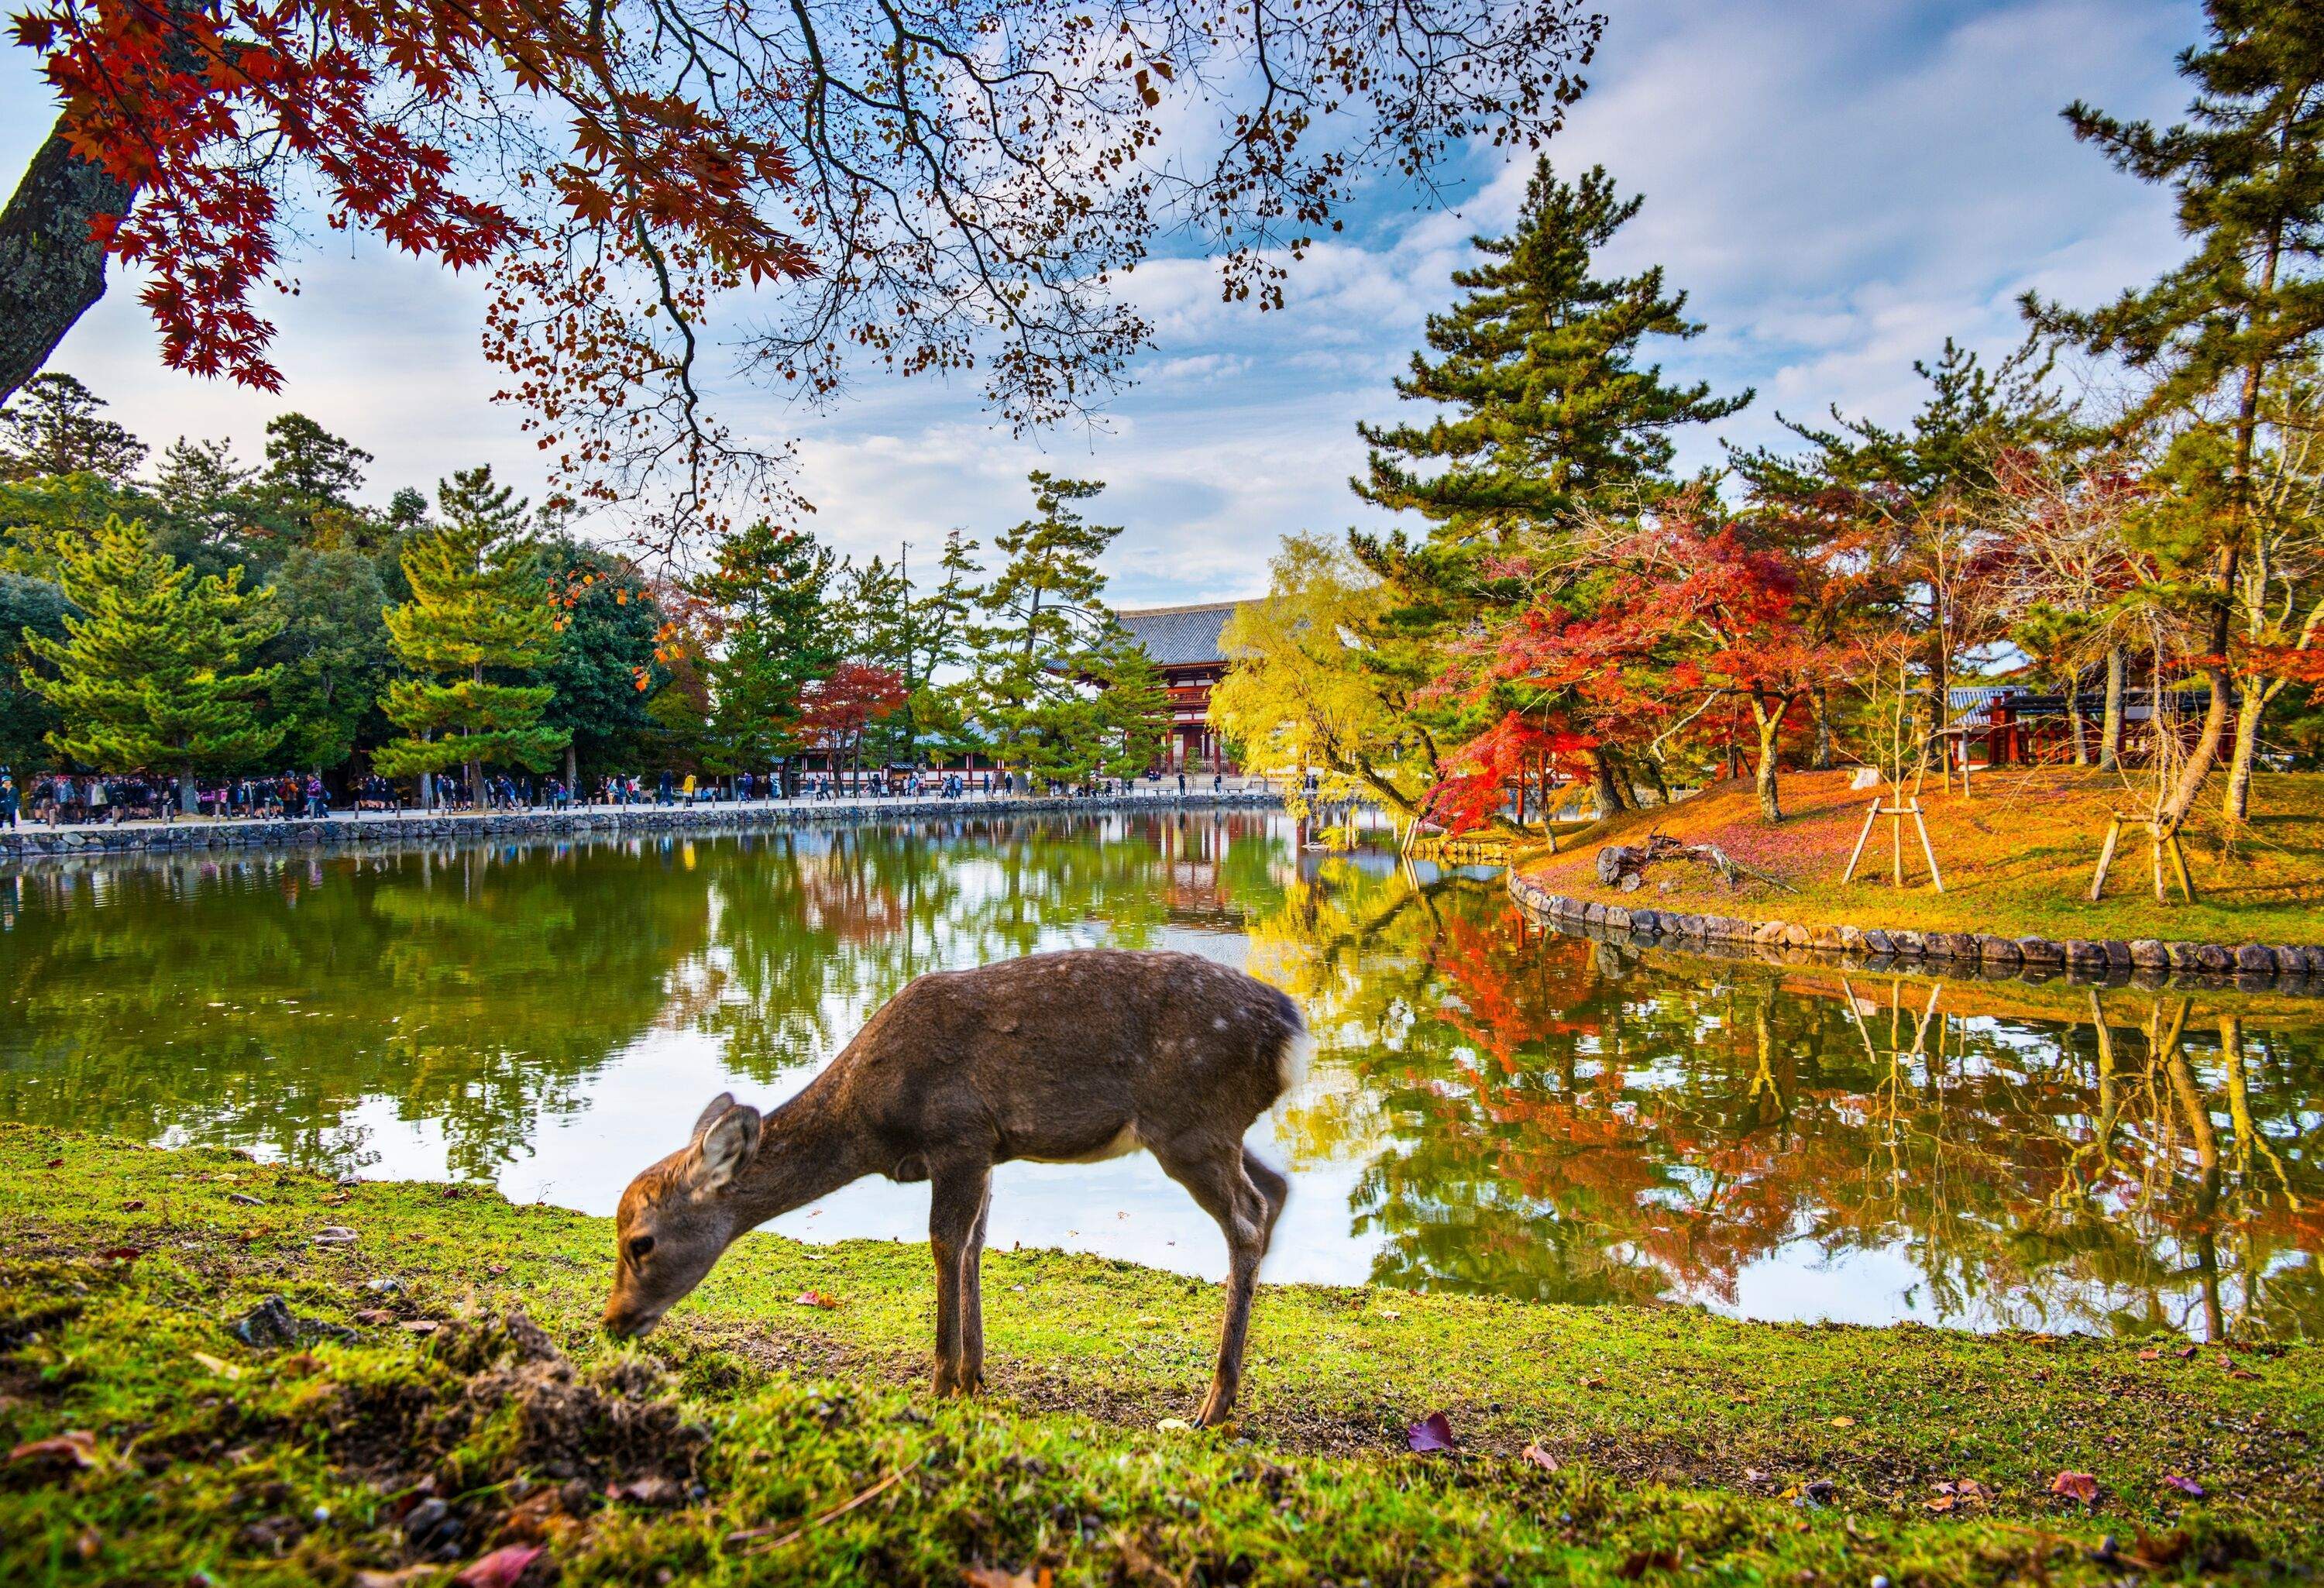 A solitary deer grazes peacefully by a tranquil pond, while the faint outline of a temple peeks through the verdant trees across the water in the background.